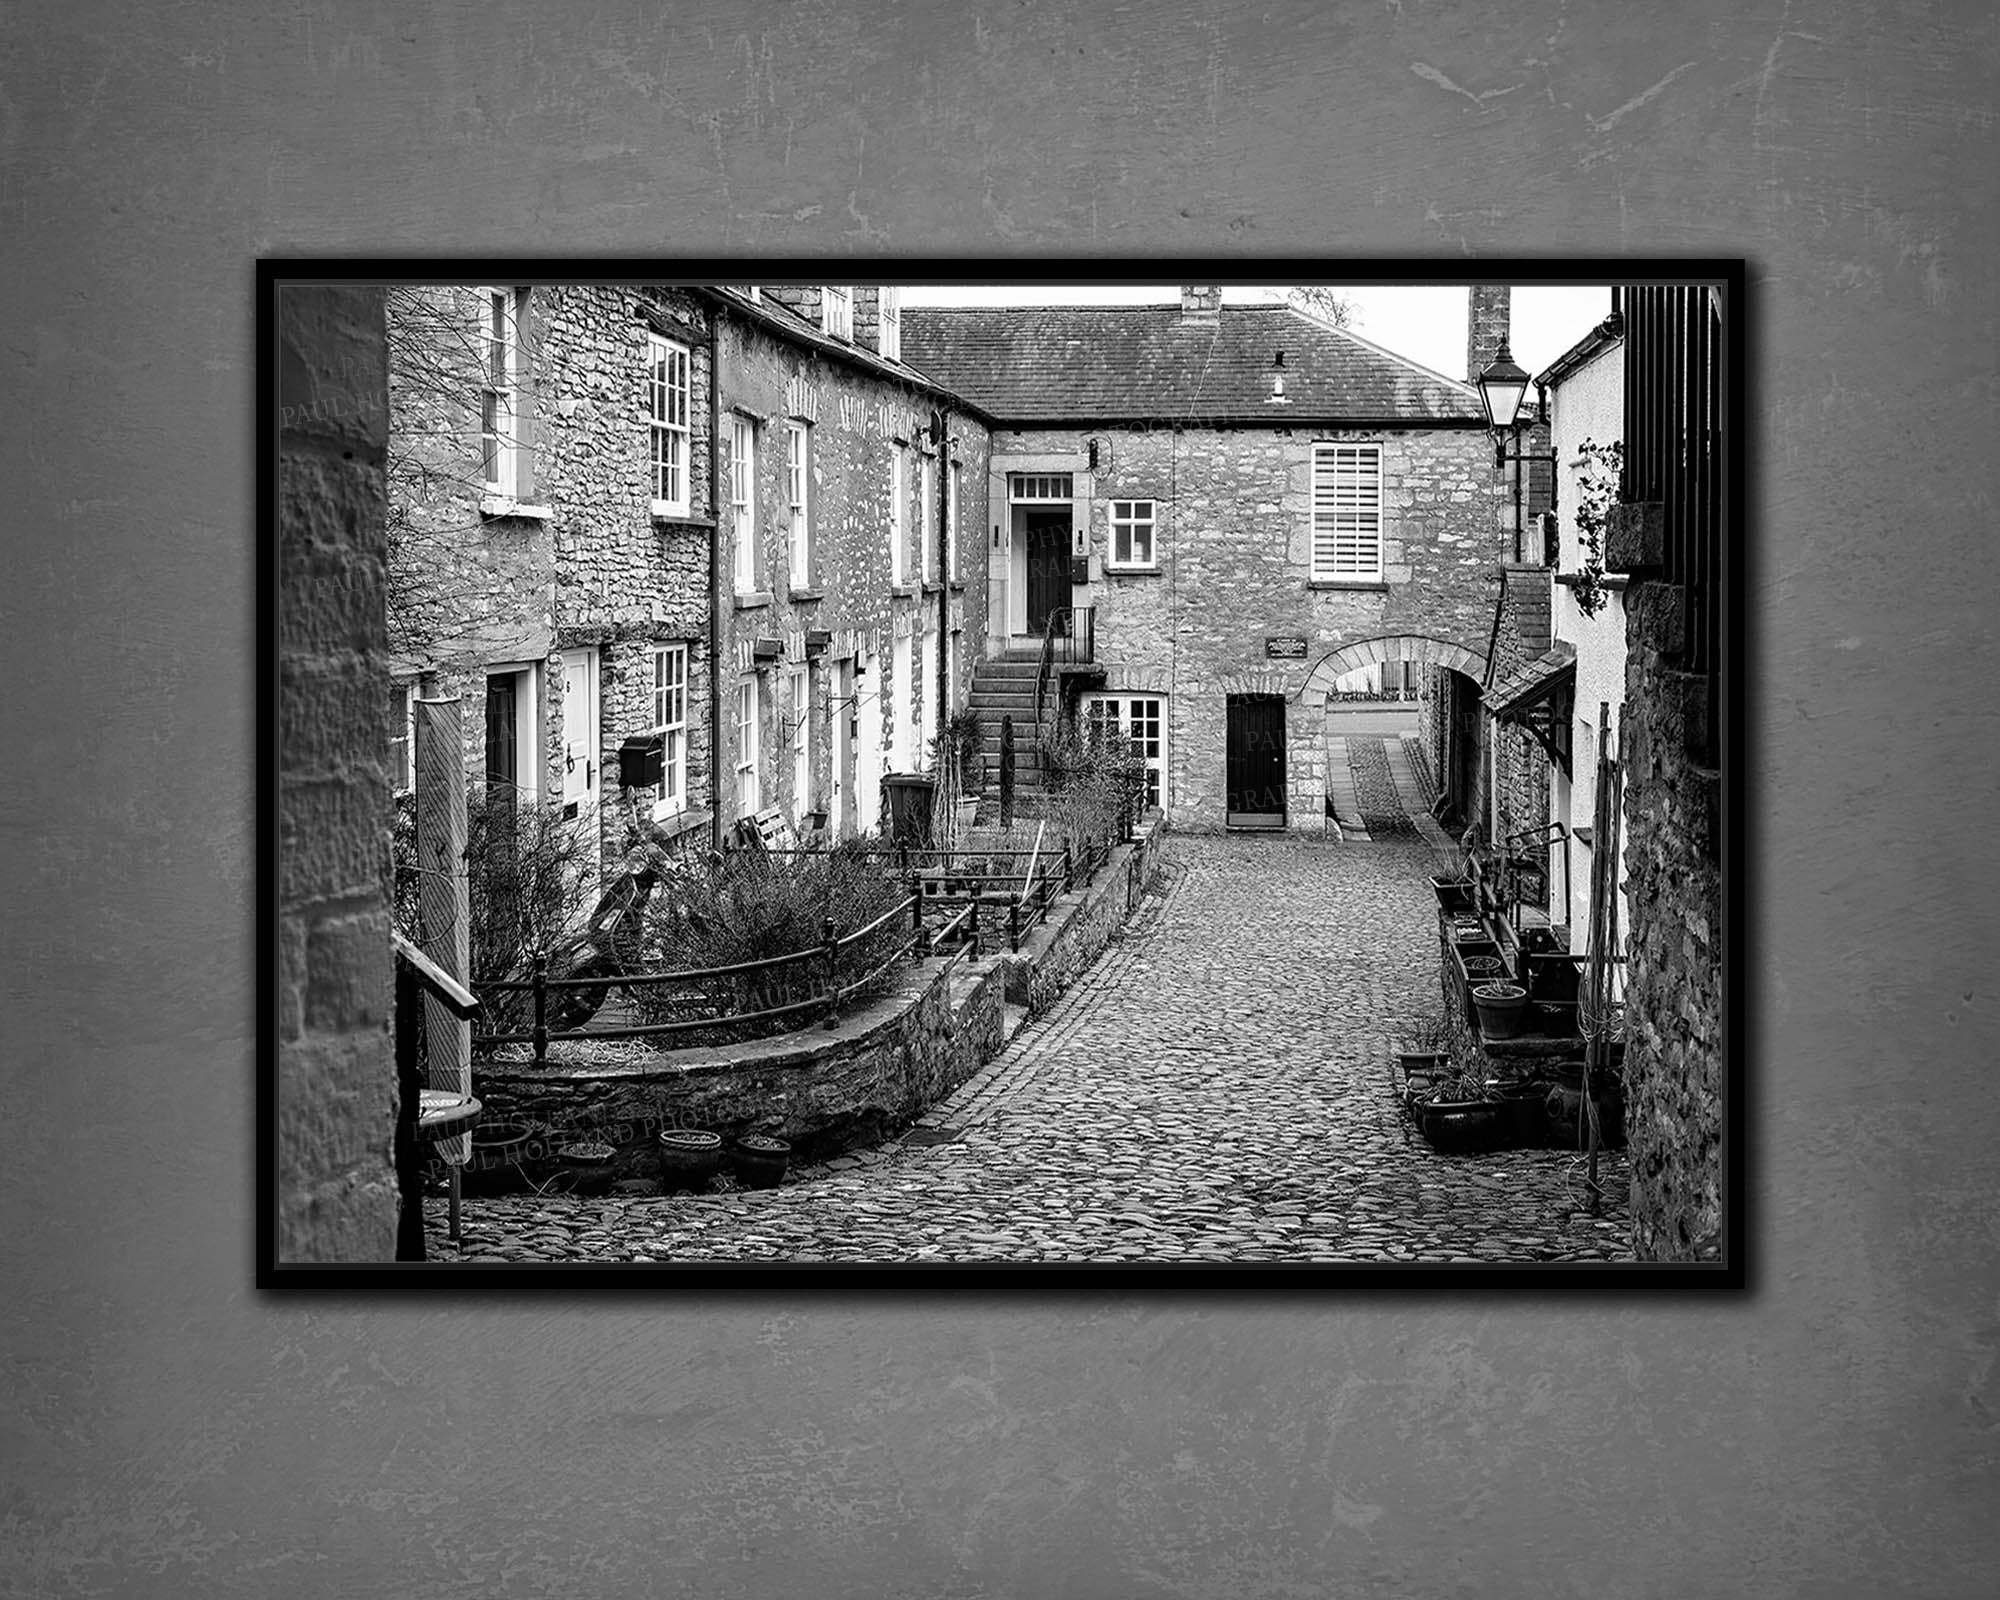 Black and White Photographic Canvas of Dr Mannings Yard, Kendal, Wall Canvas